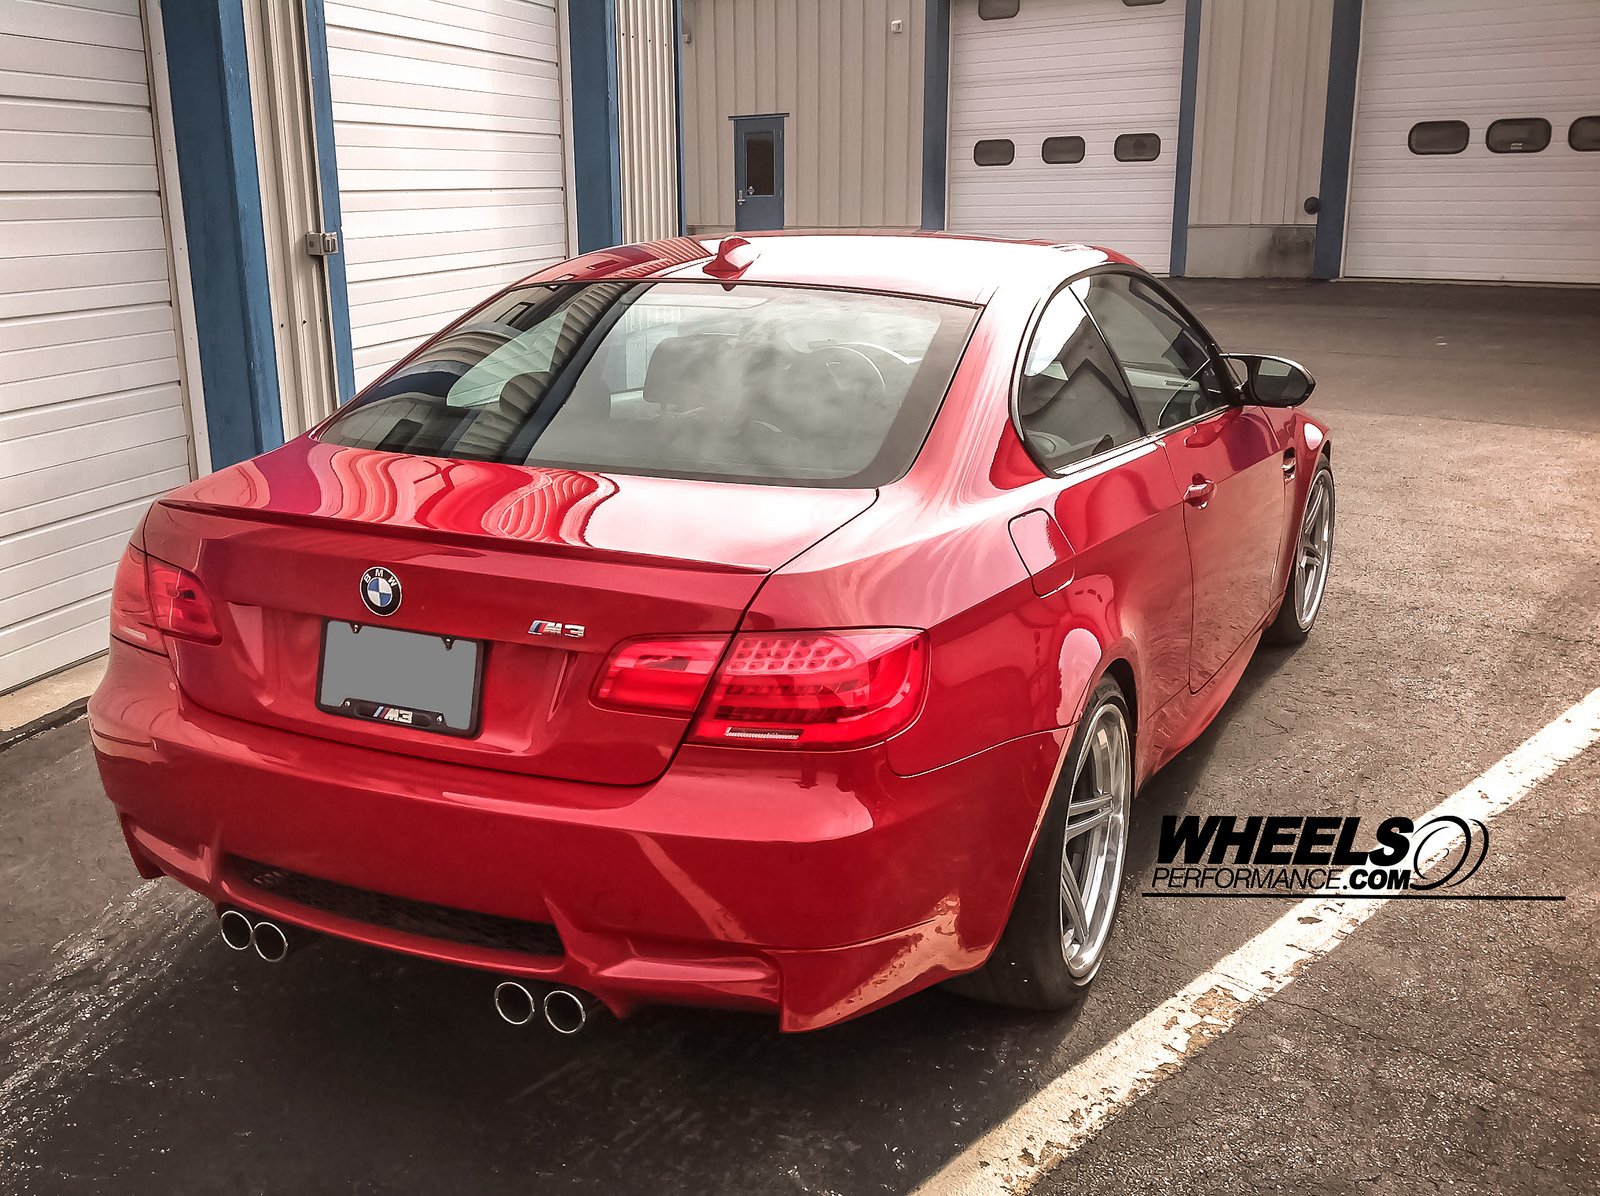 bmw, M3, E92, Wheels, Tuning, Cars, Red Wallpaper